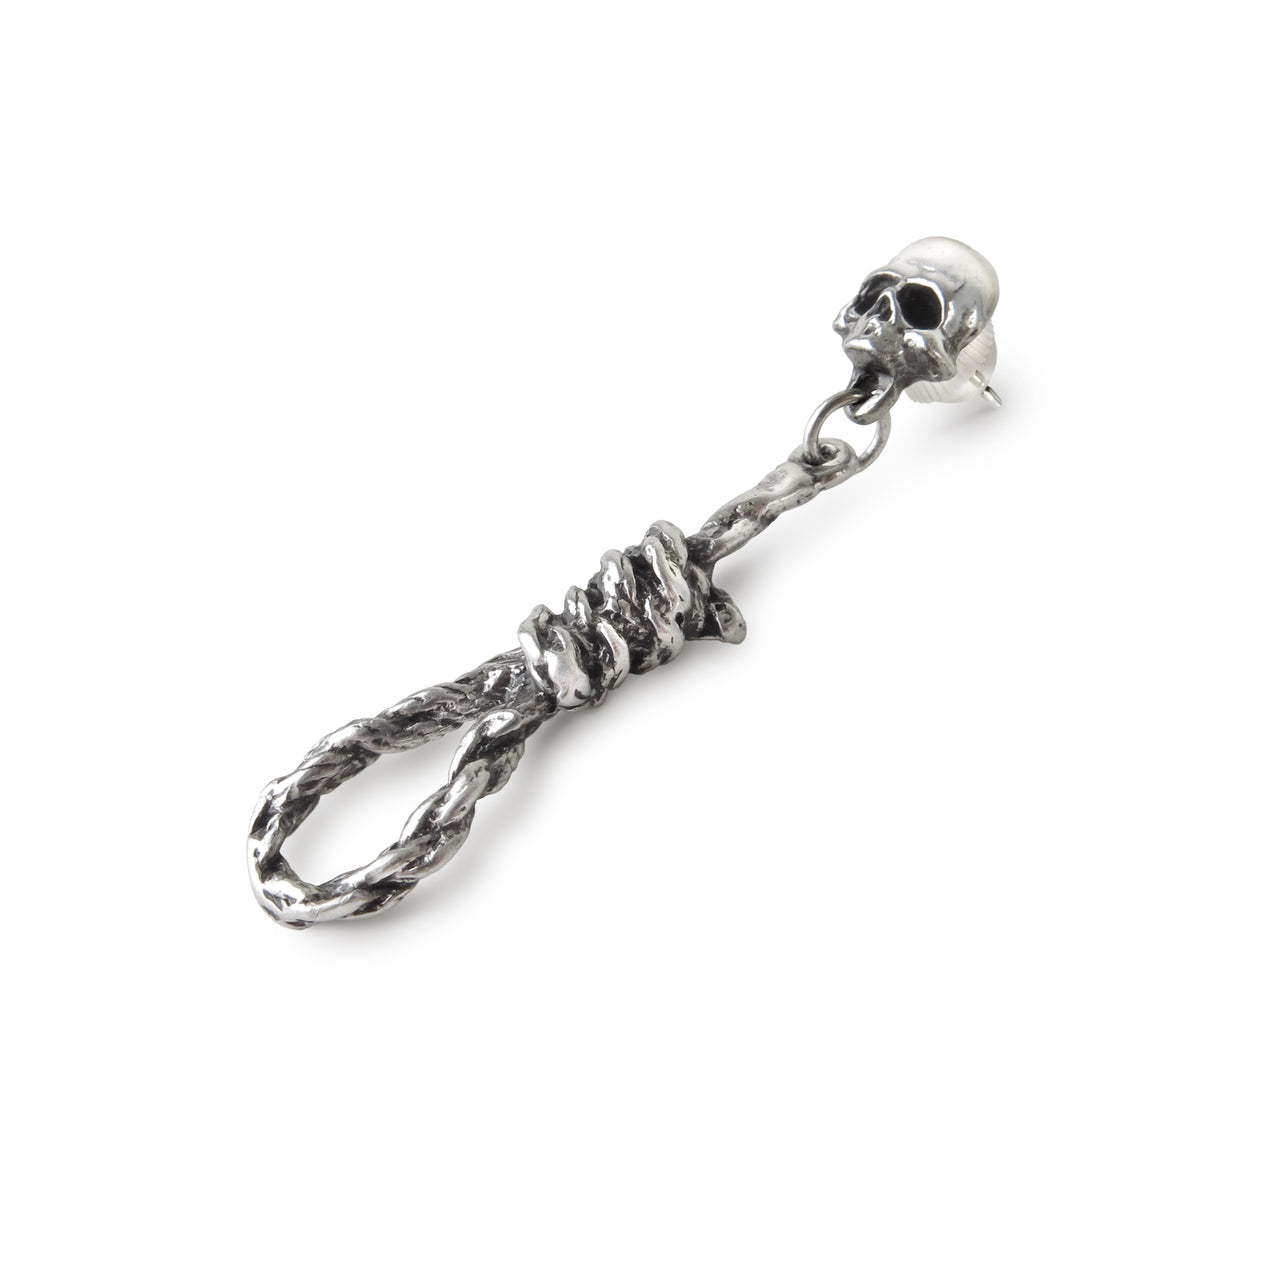 Hang Man's Noose Earring by Alchemy Gothic